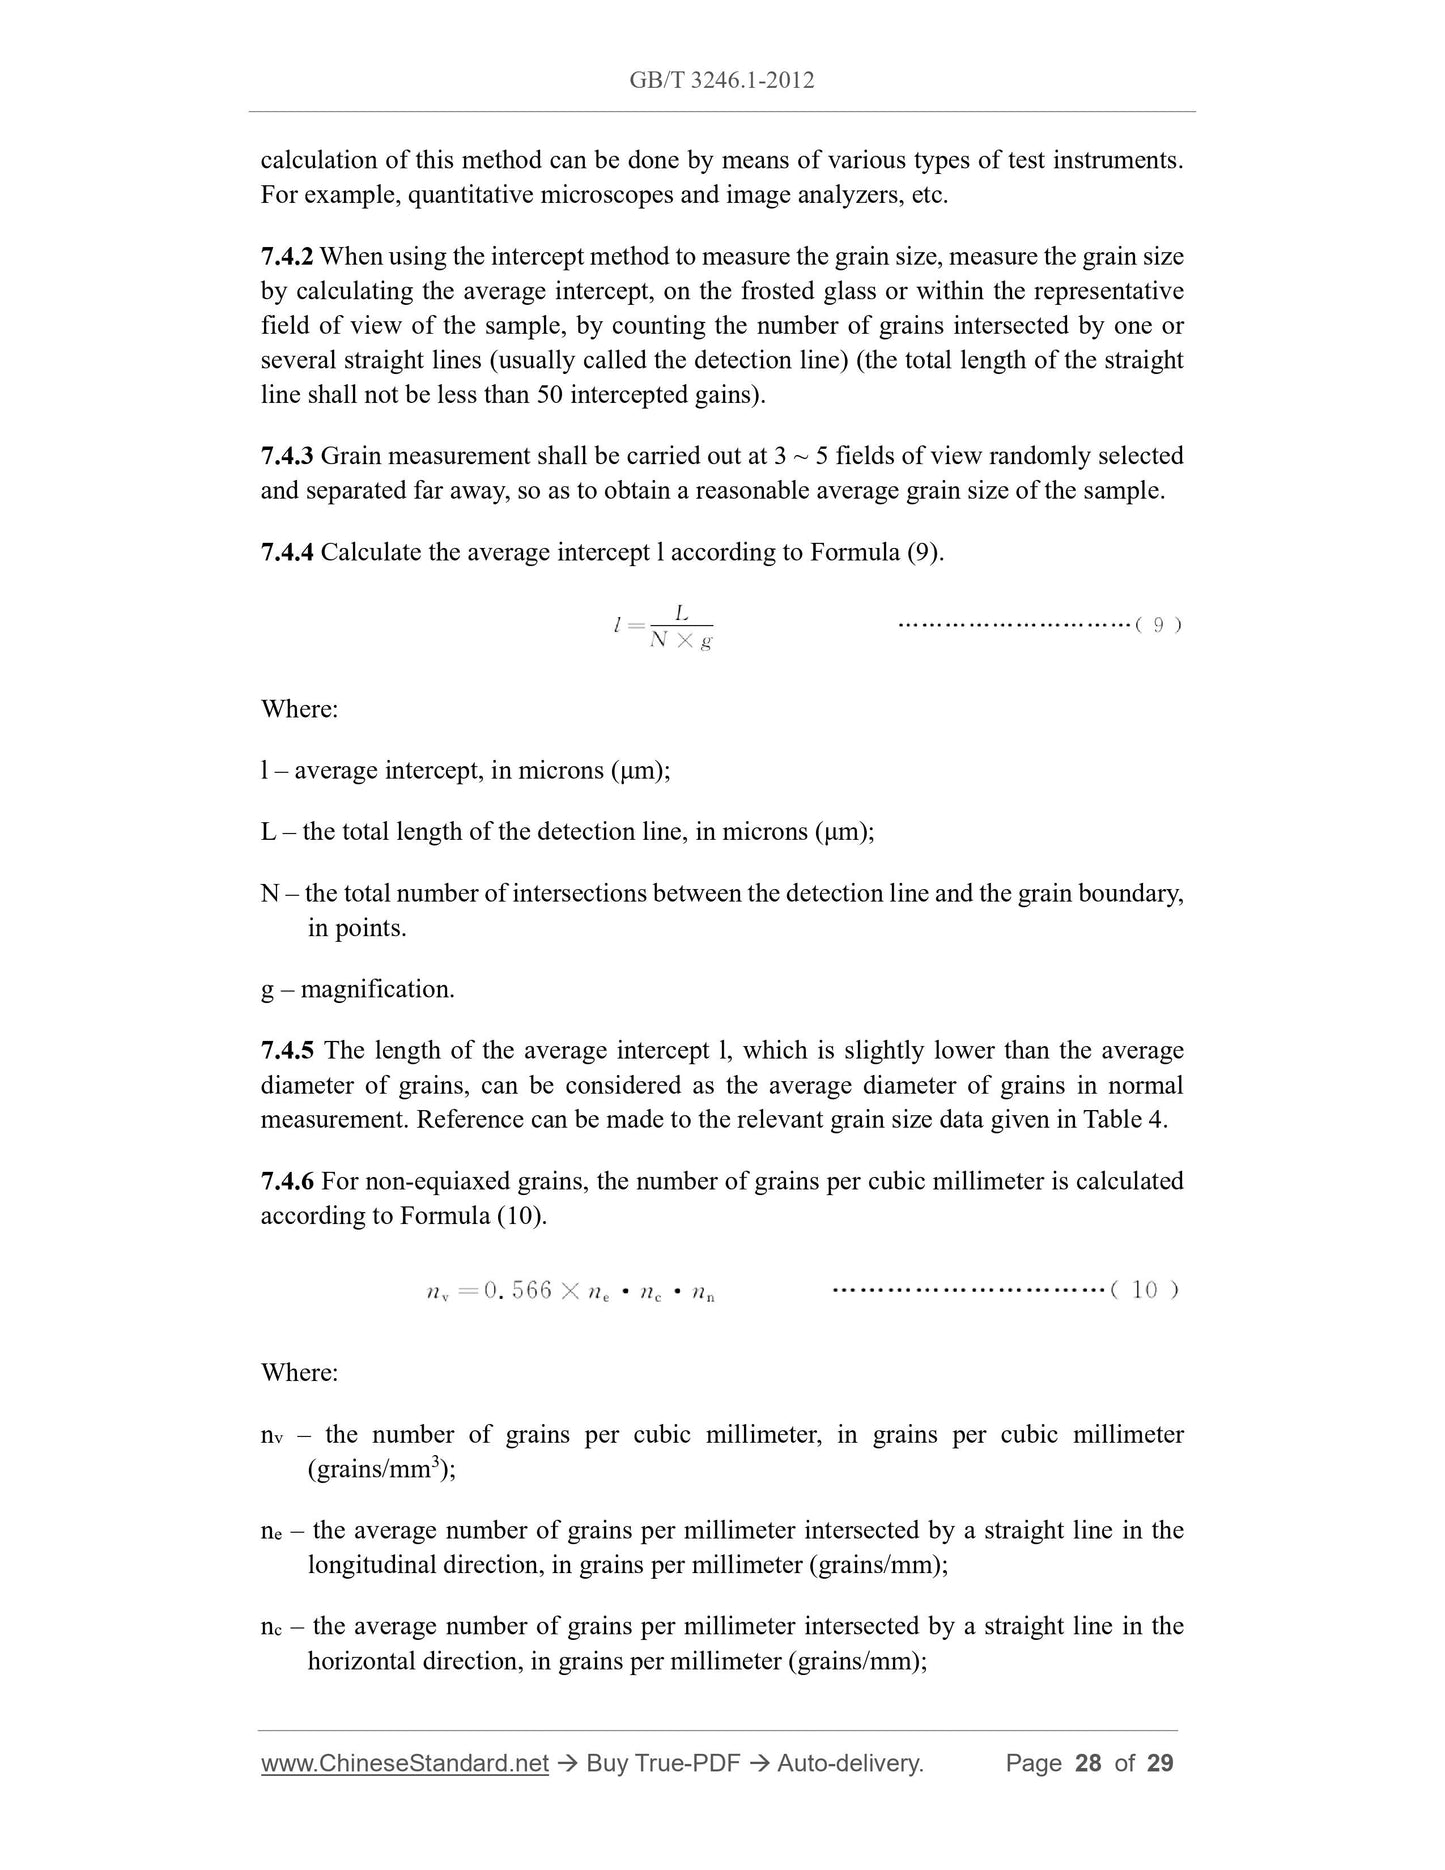 GB/T 3246.1-2012 Page 6